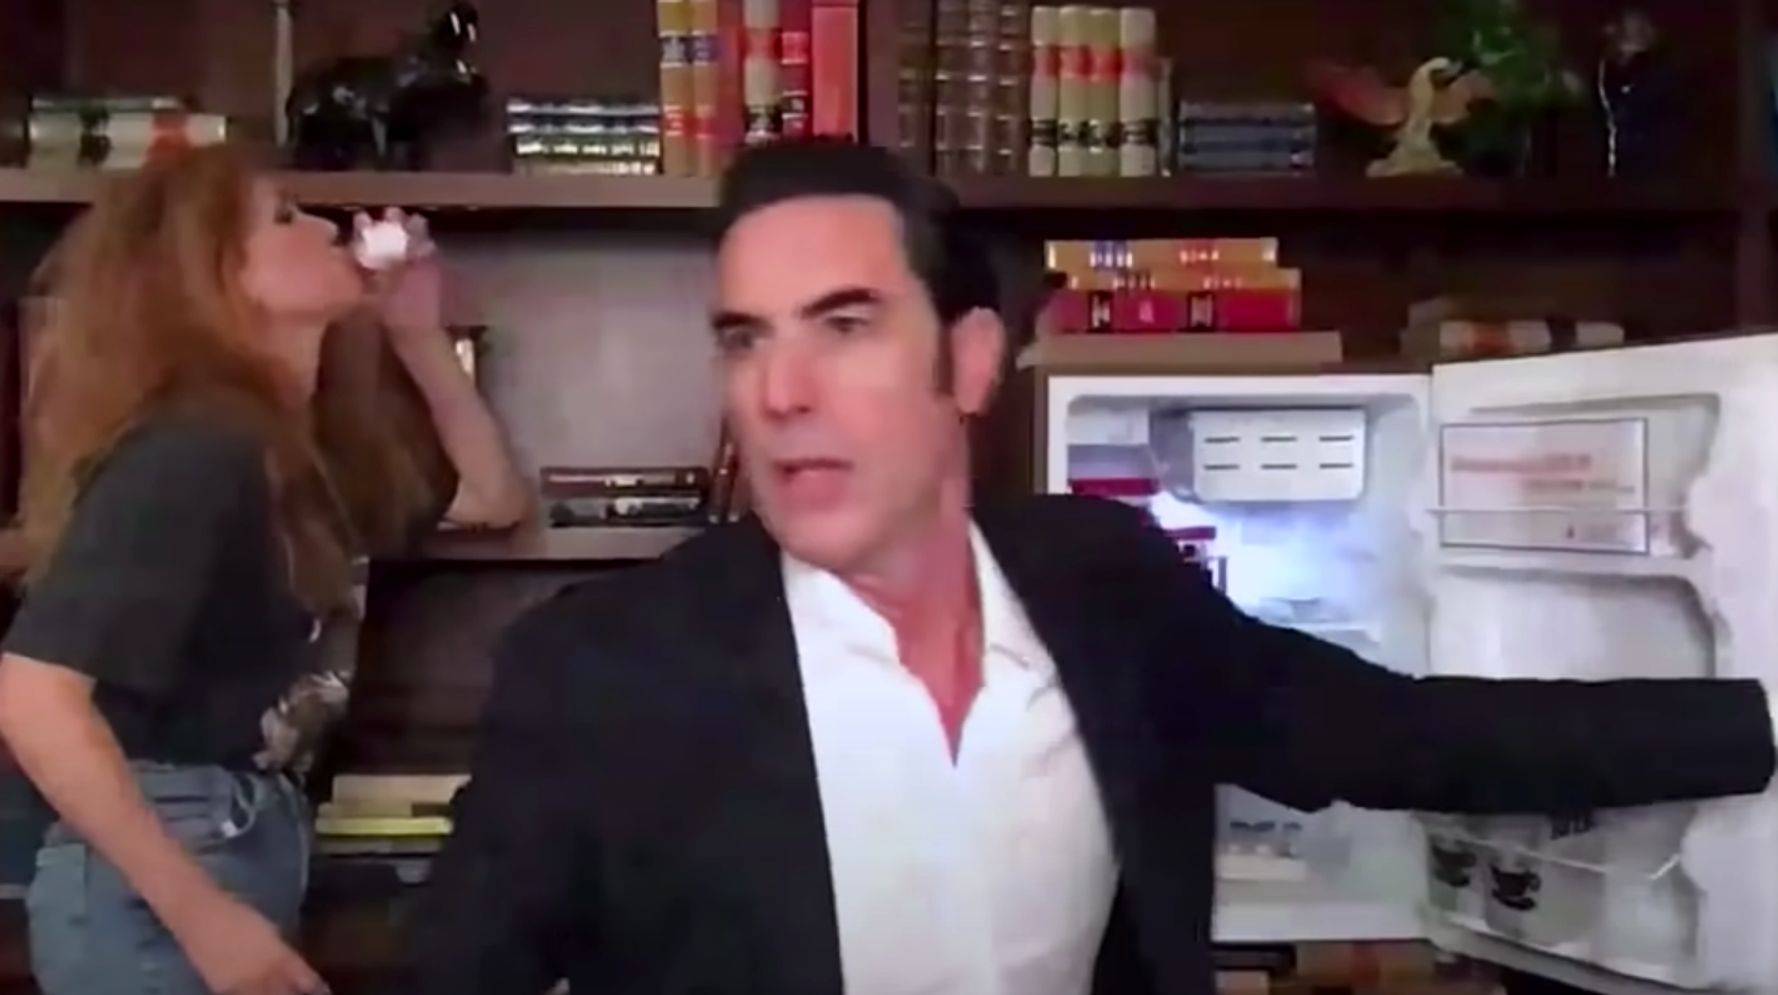 Sacha Baron Cohen Dings, Donald Trump Jr., Kanye West, in a wild video selling COVID-19 vaccine